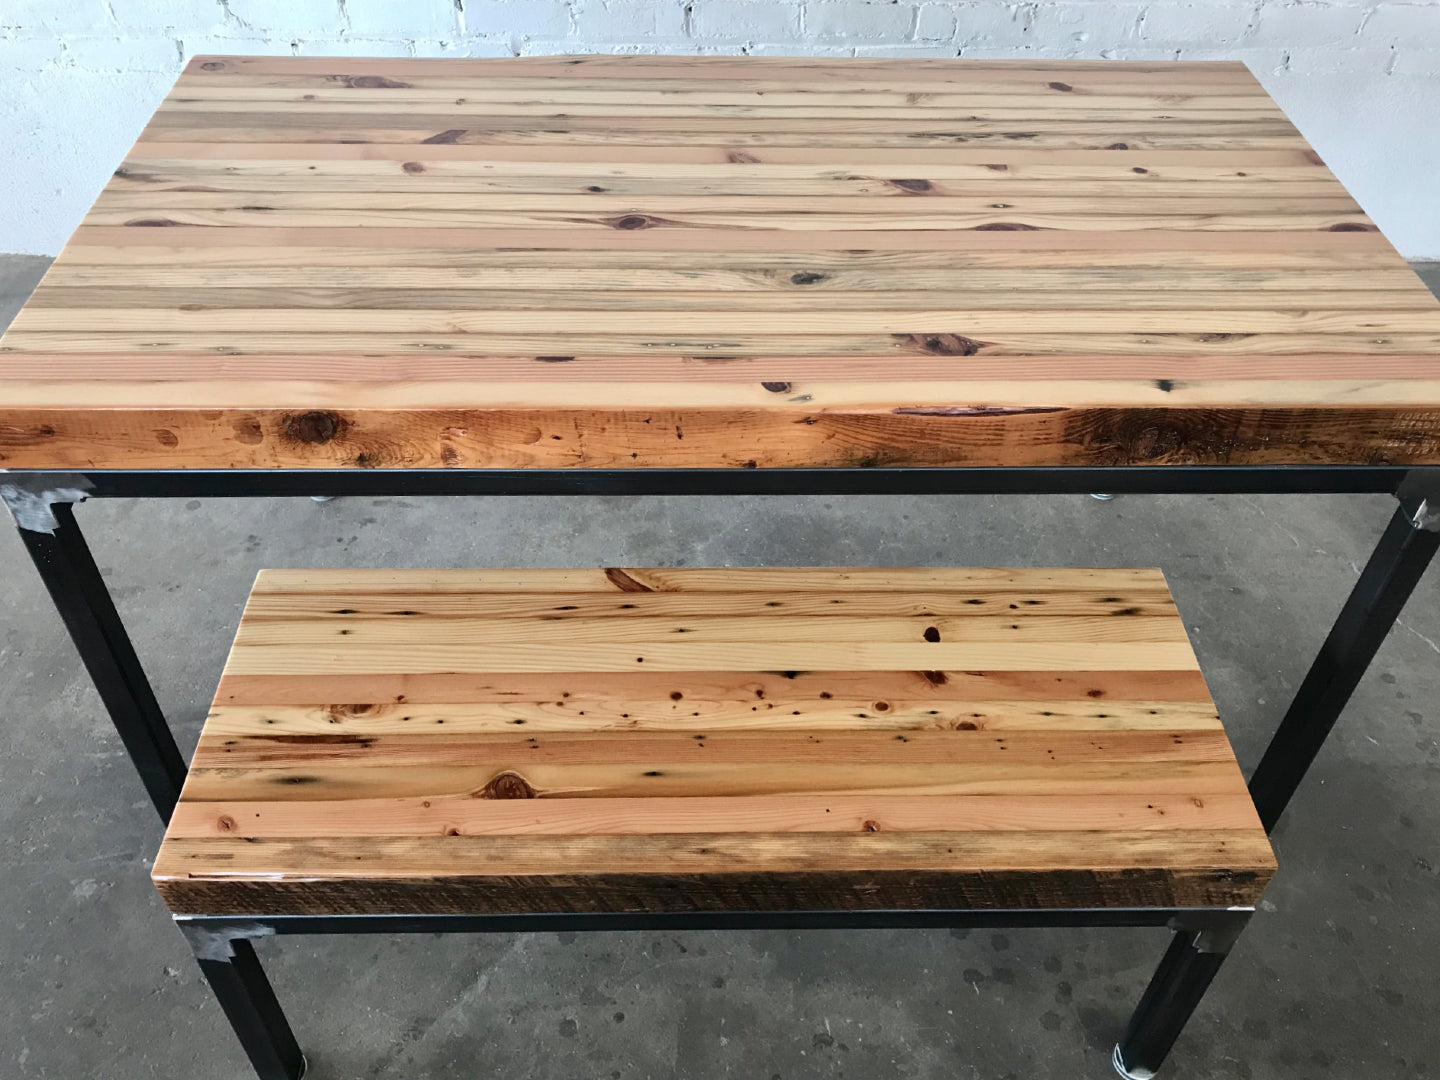 Grand Boulevard Modern Farmhouse Reclaimed Wood Table and Bench Set